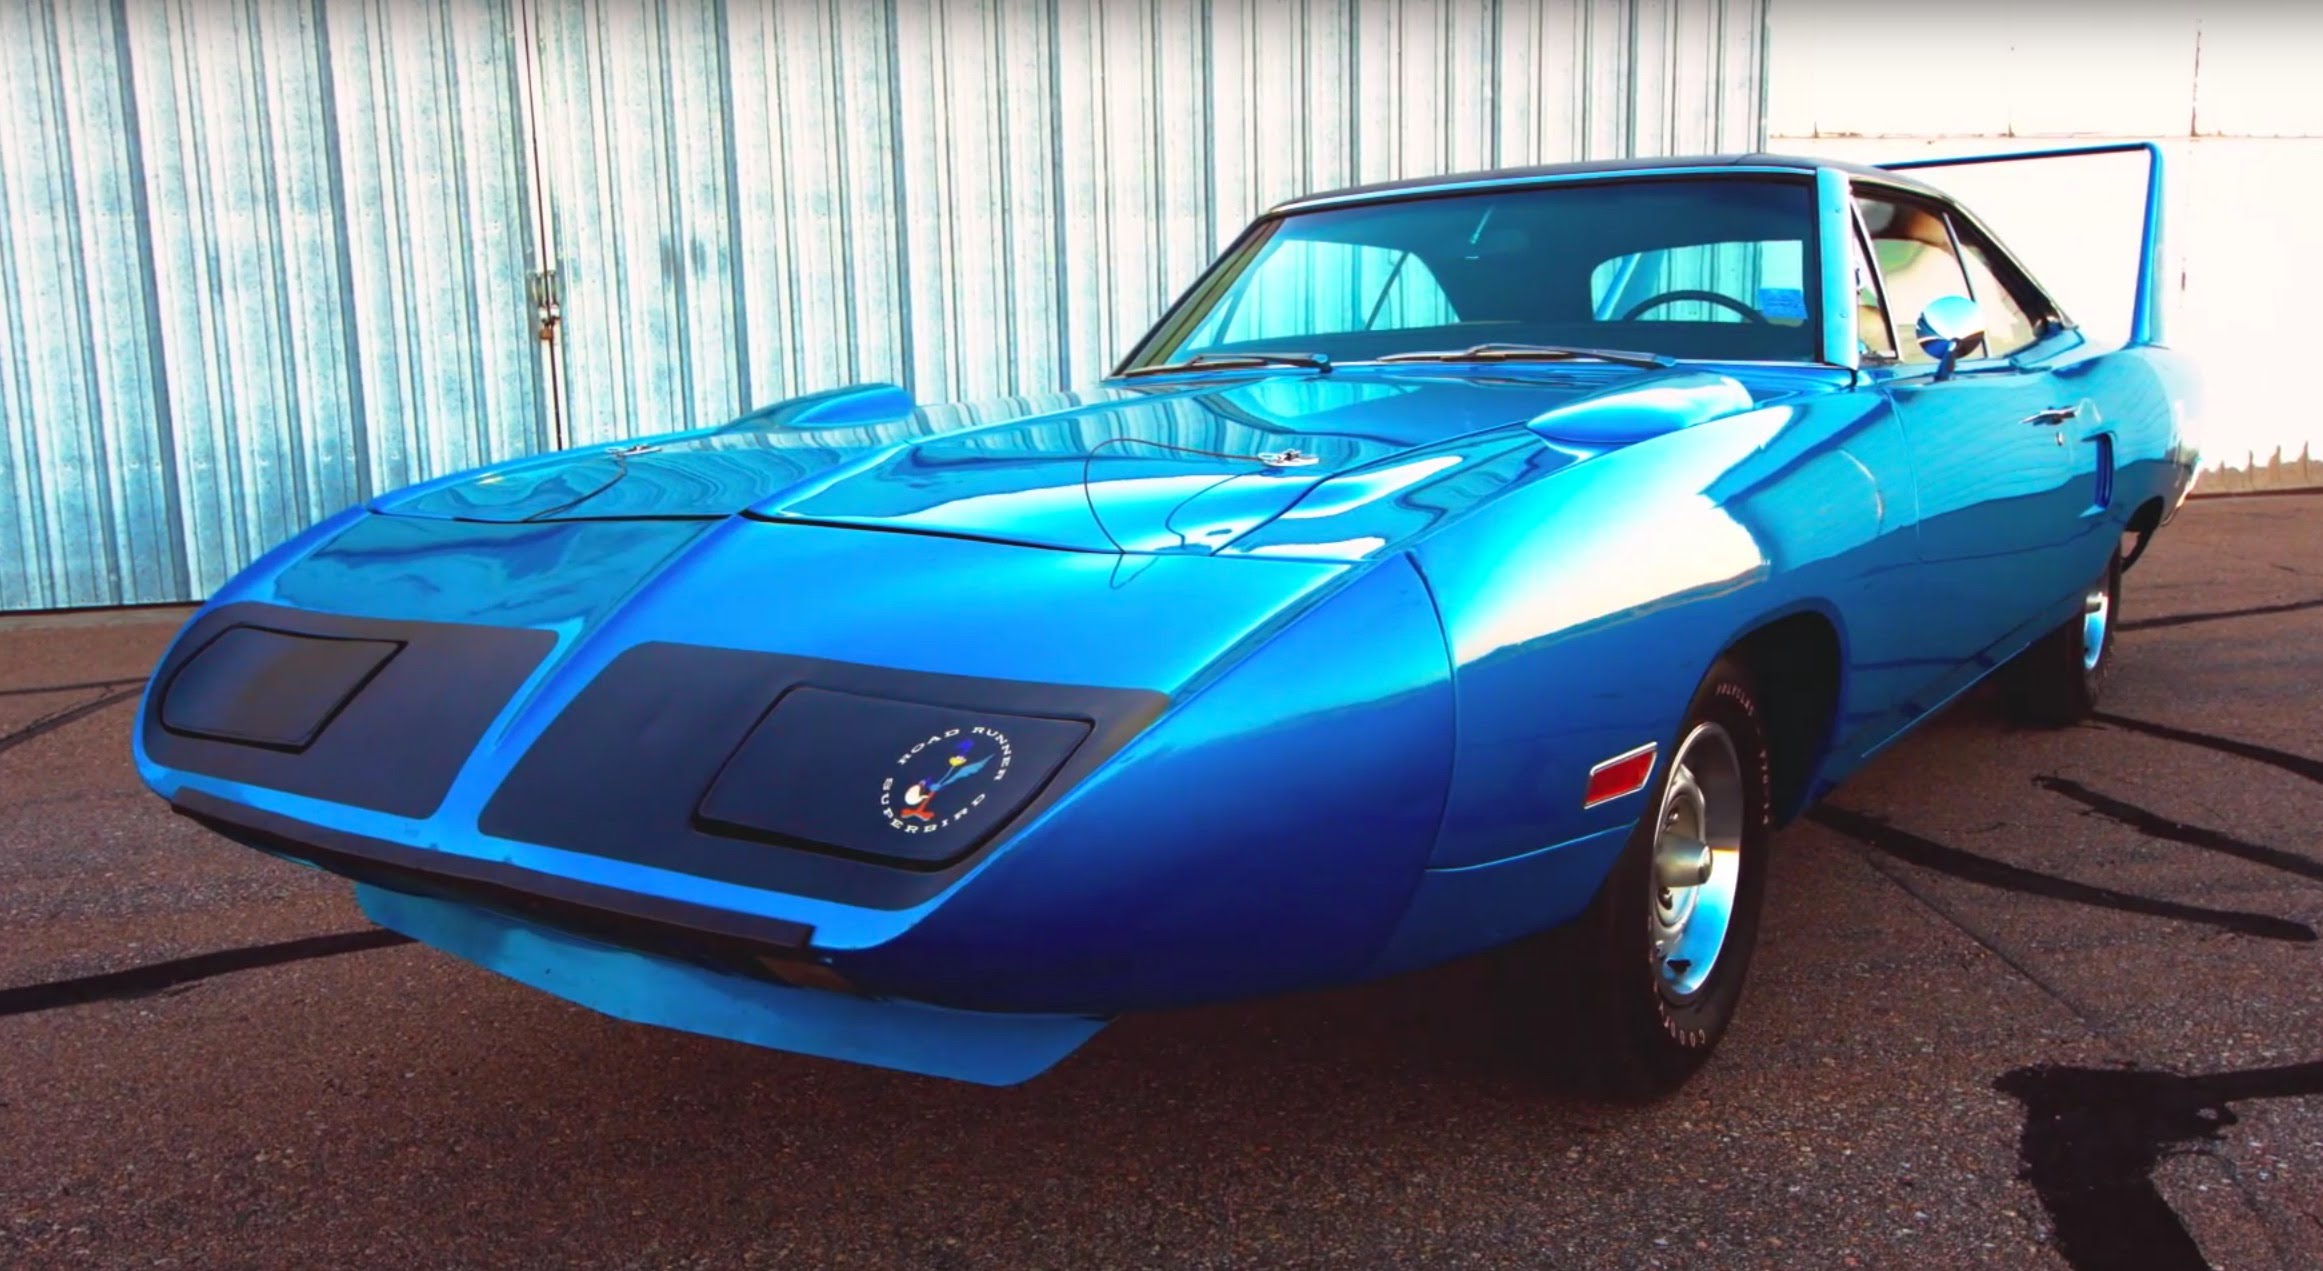 1970 Plymouth Superbird Backgrounds, Compatible - PC, Mobile, Gadgets| 2323x1271 px